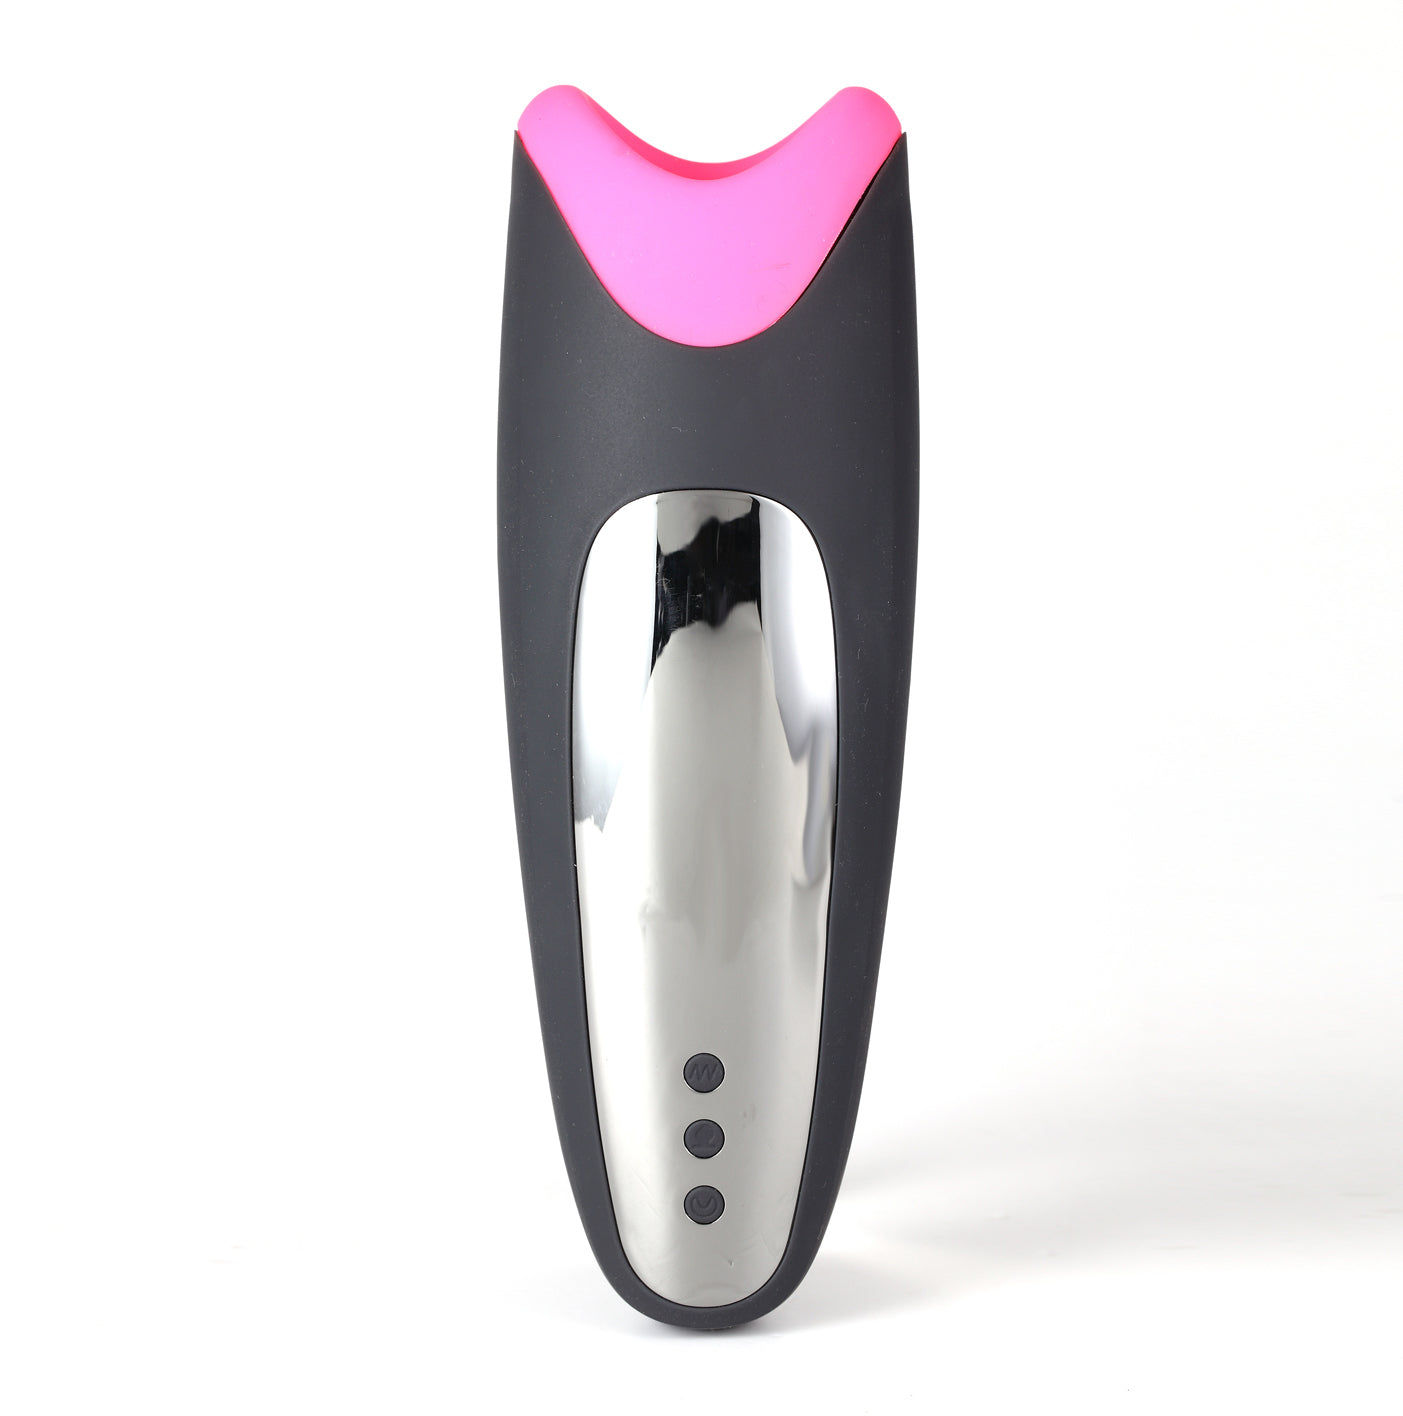 Piper USB Rechargeable Multi Function Masturbator With Suction - Black/pink-4